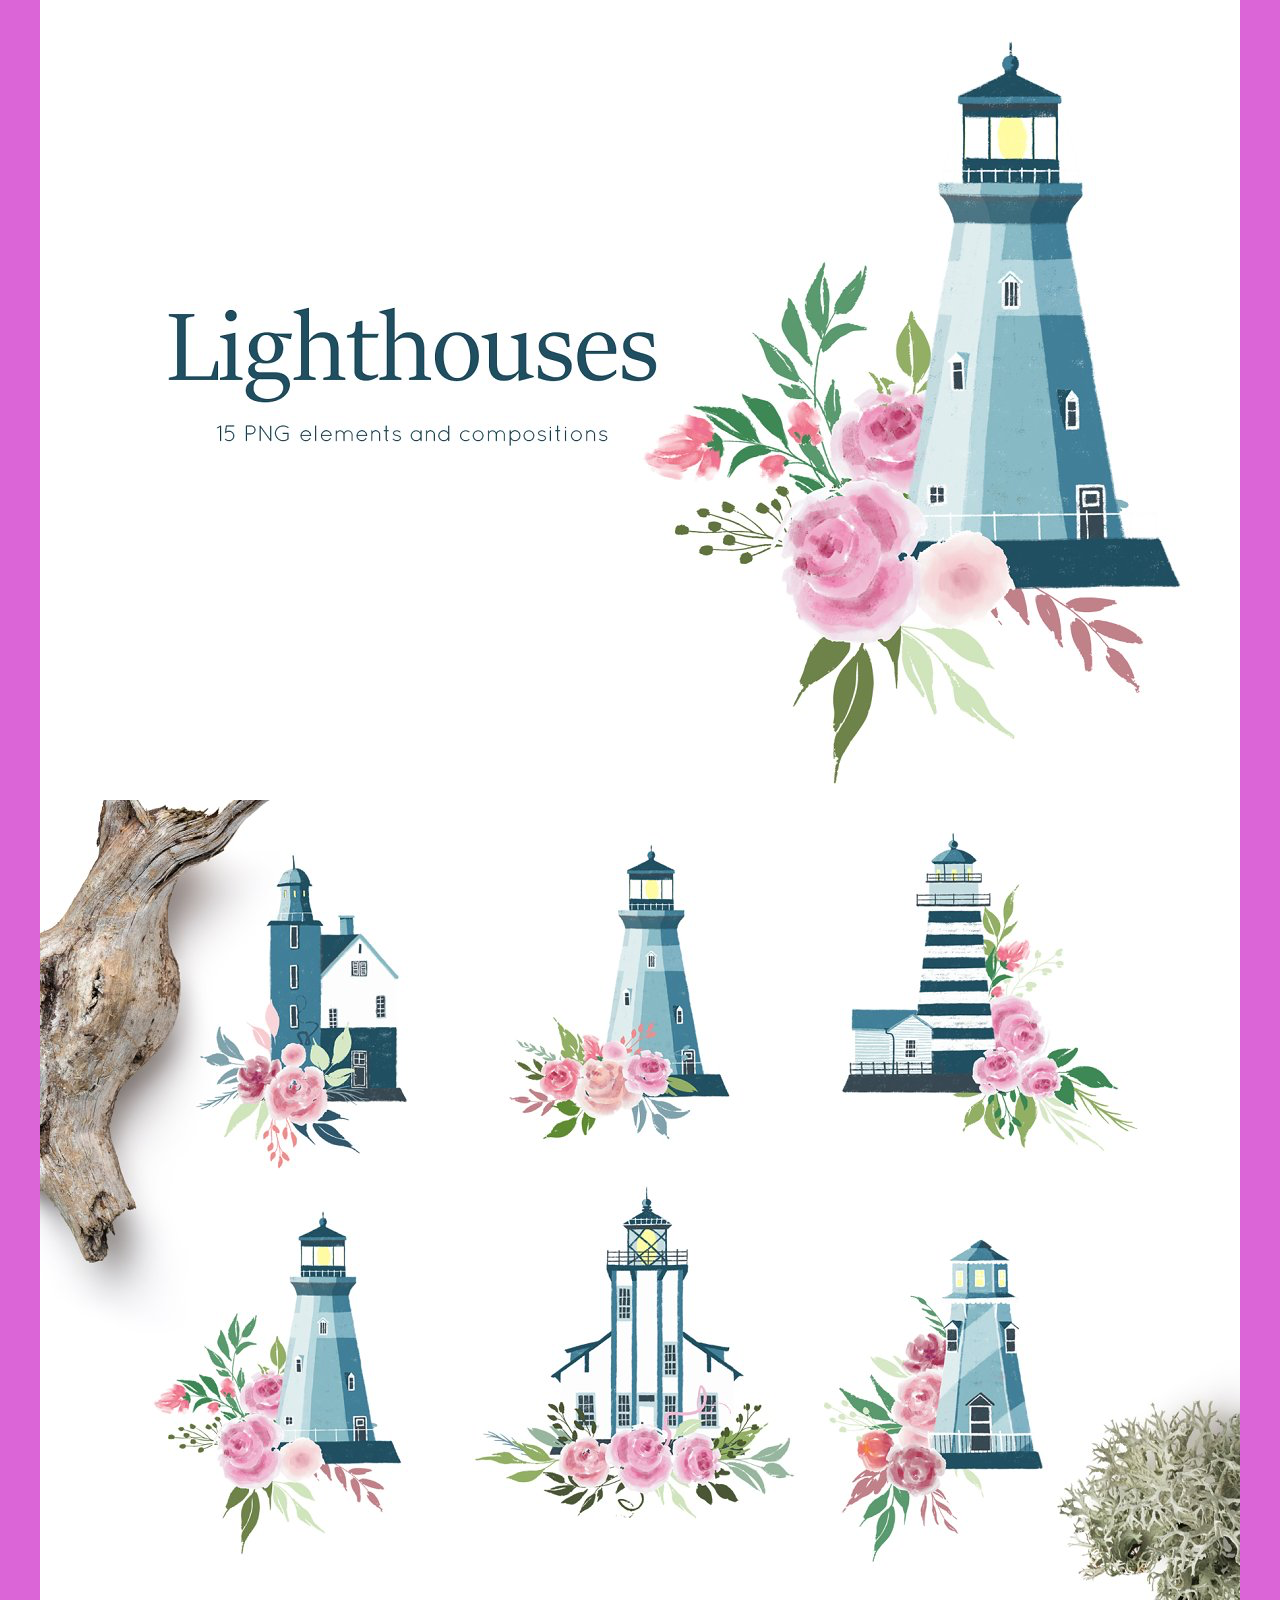 Lighthouses and floral compositions pinterest image preview.